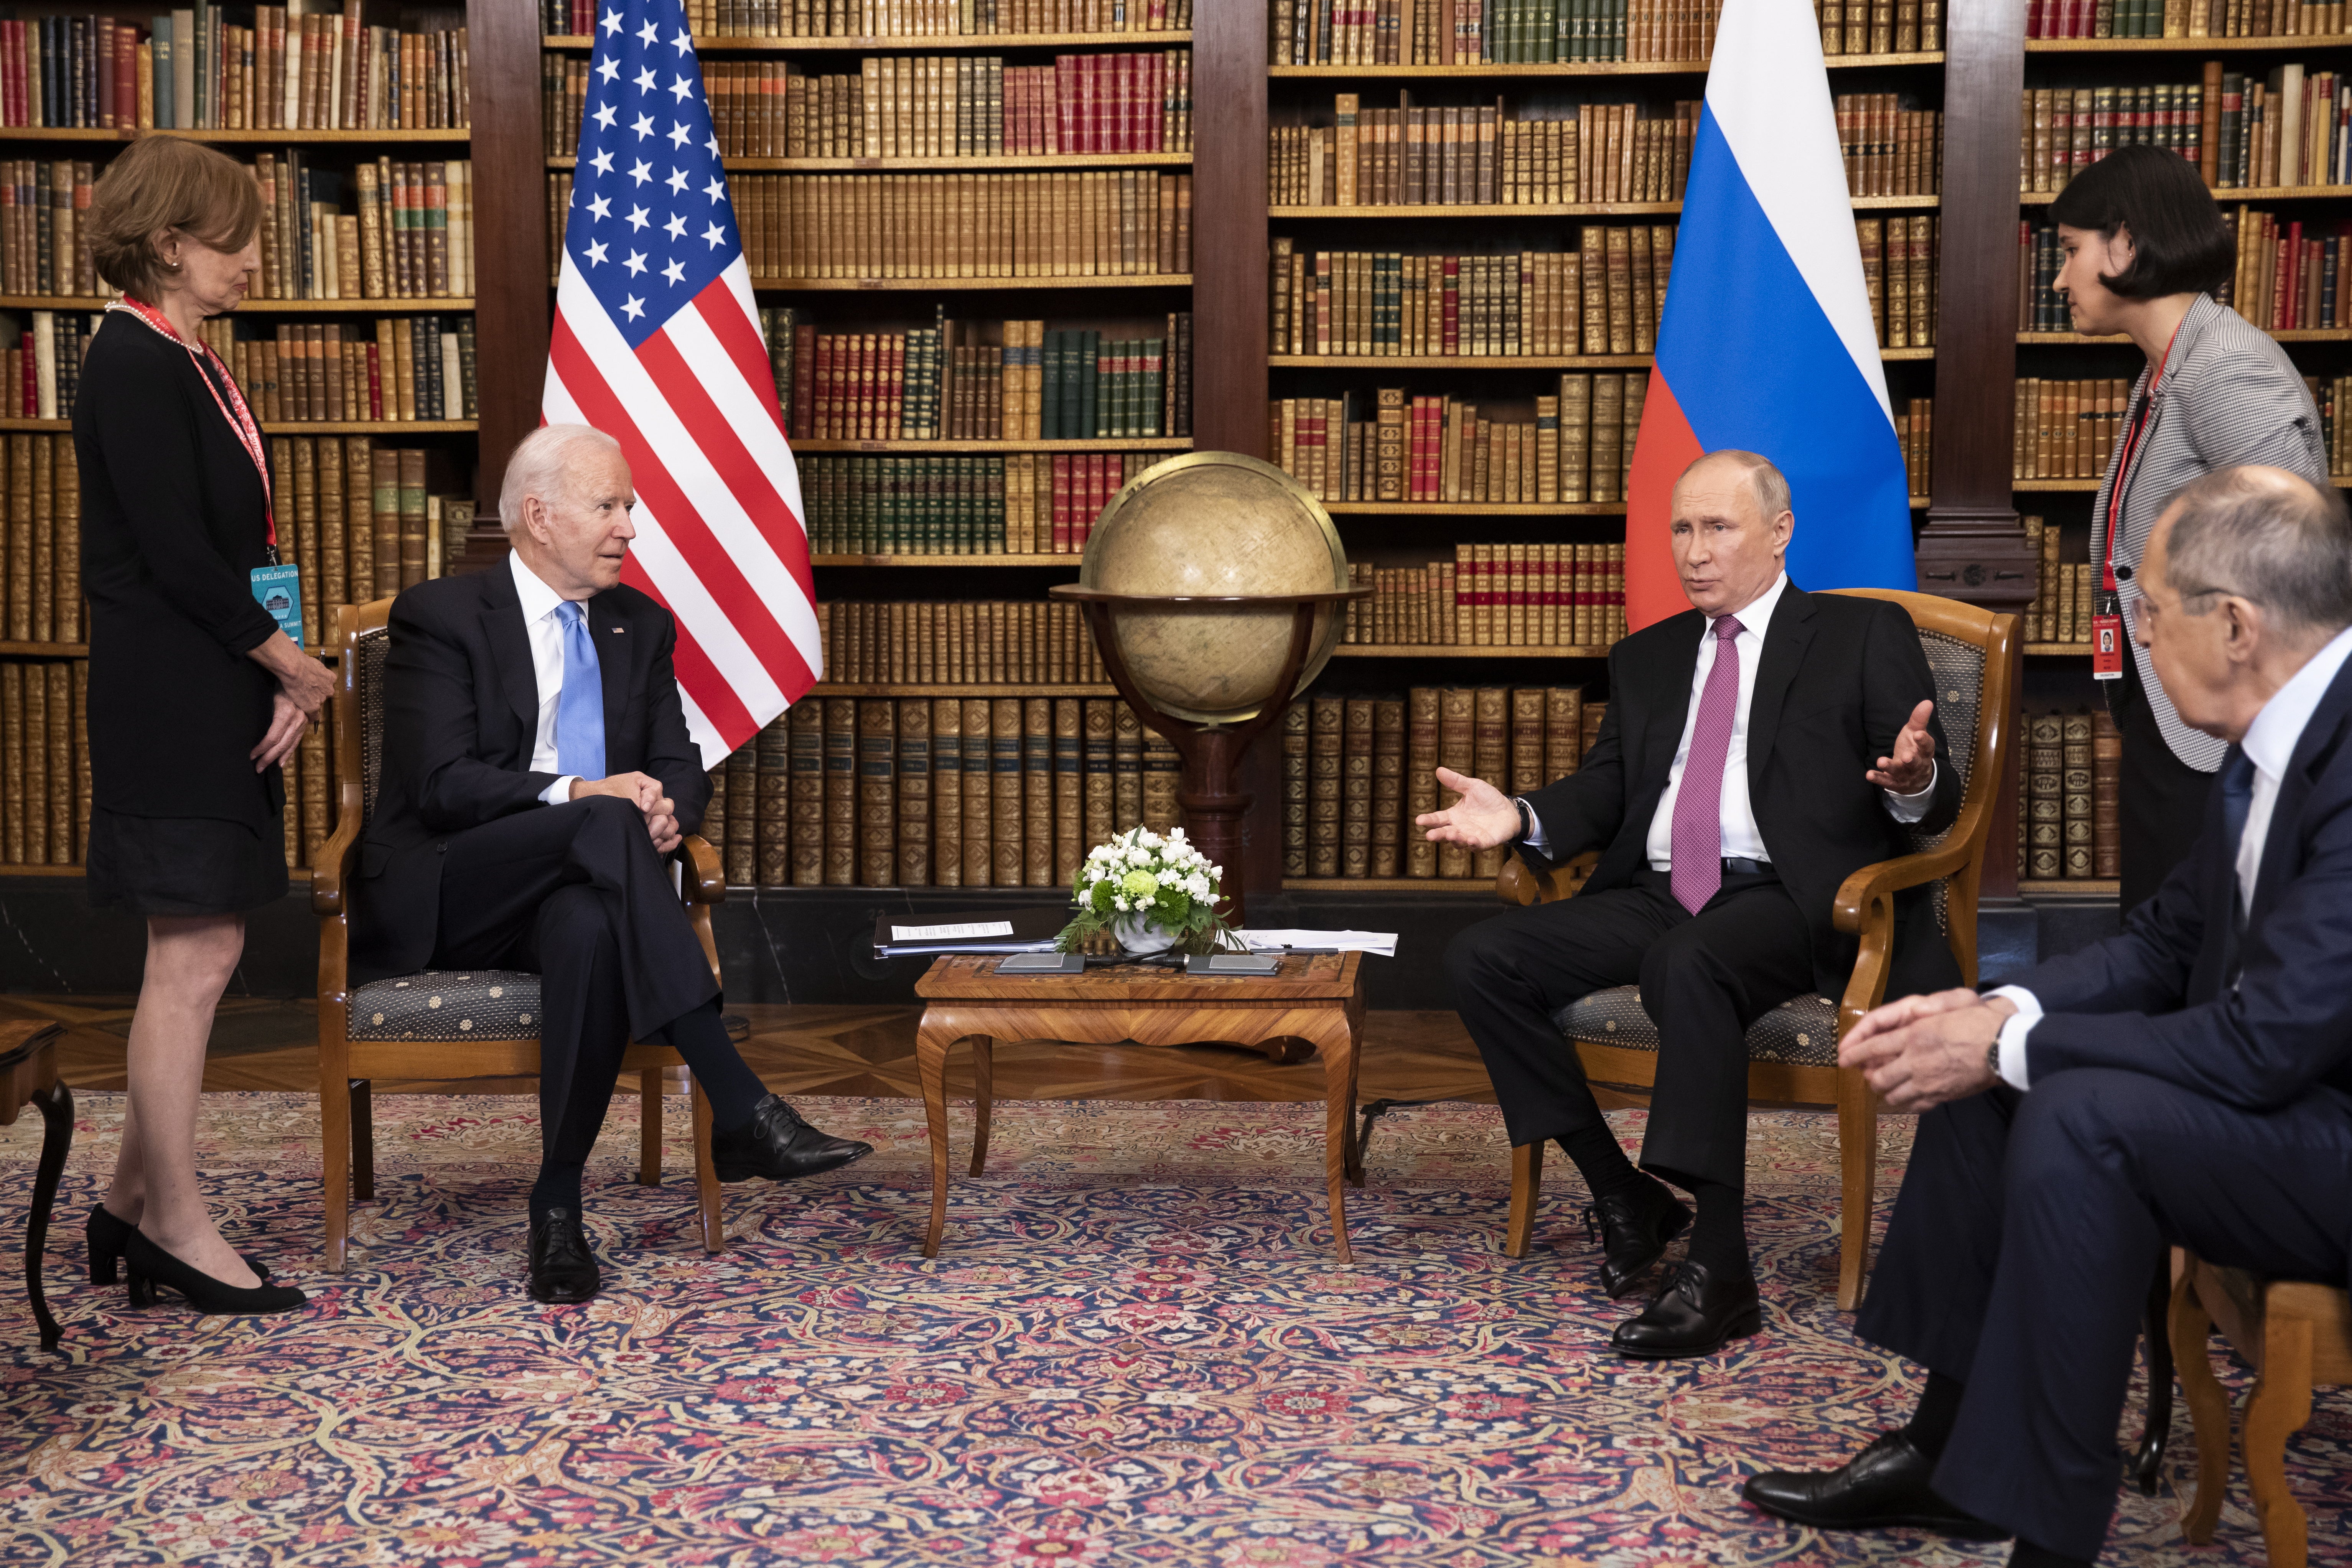 Biden, who came in to office on January 20, immediately proposed a five-year extension to New Start, which Russian President Vladimir Putin quickly agreed to